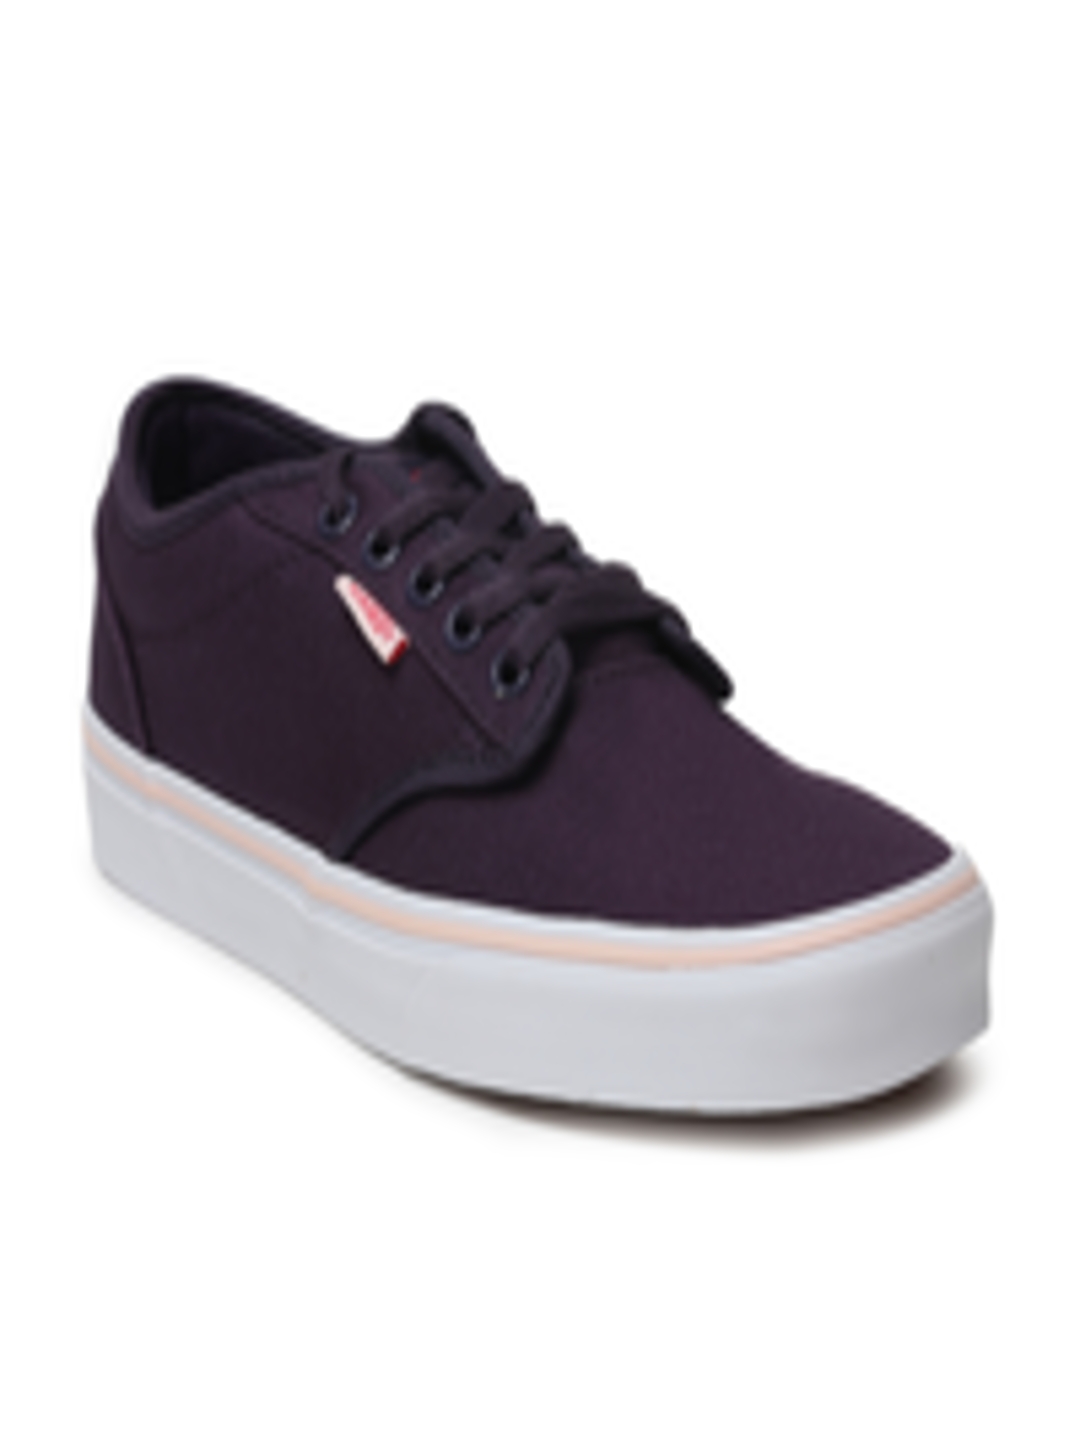 Buy Vans Women Purple Atwood Sneakers - Casual Shoes for ...